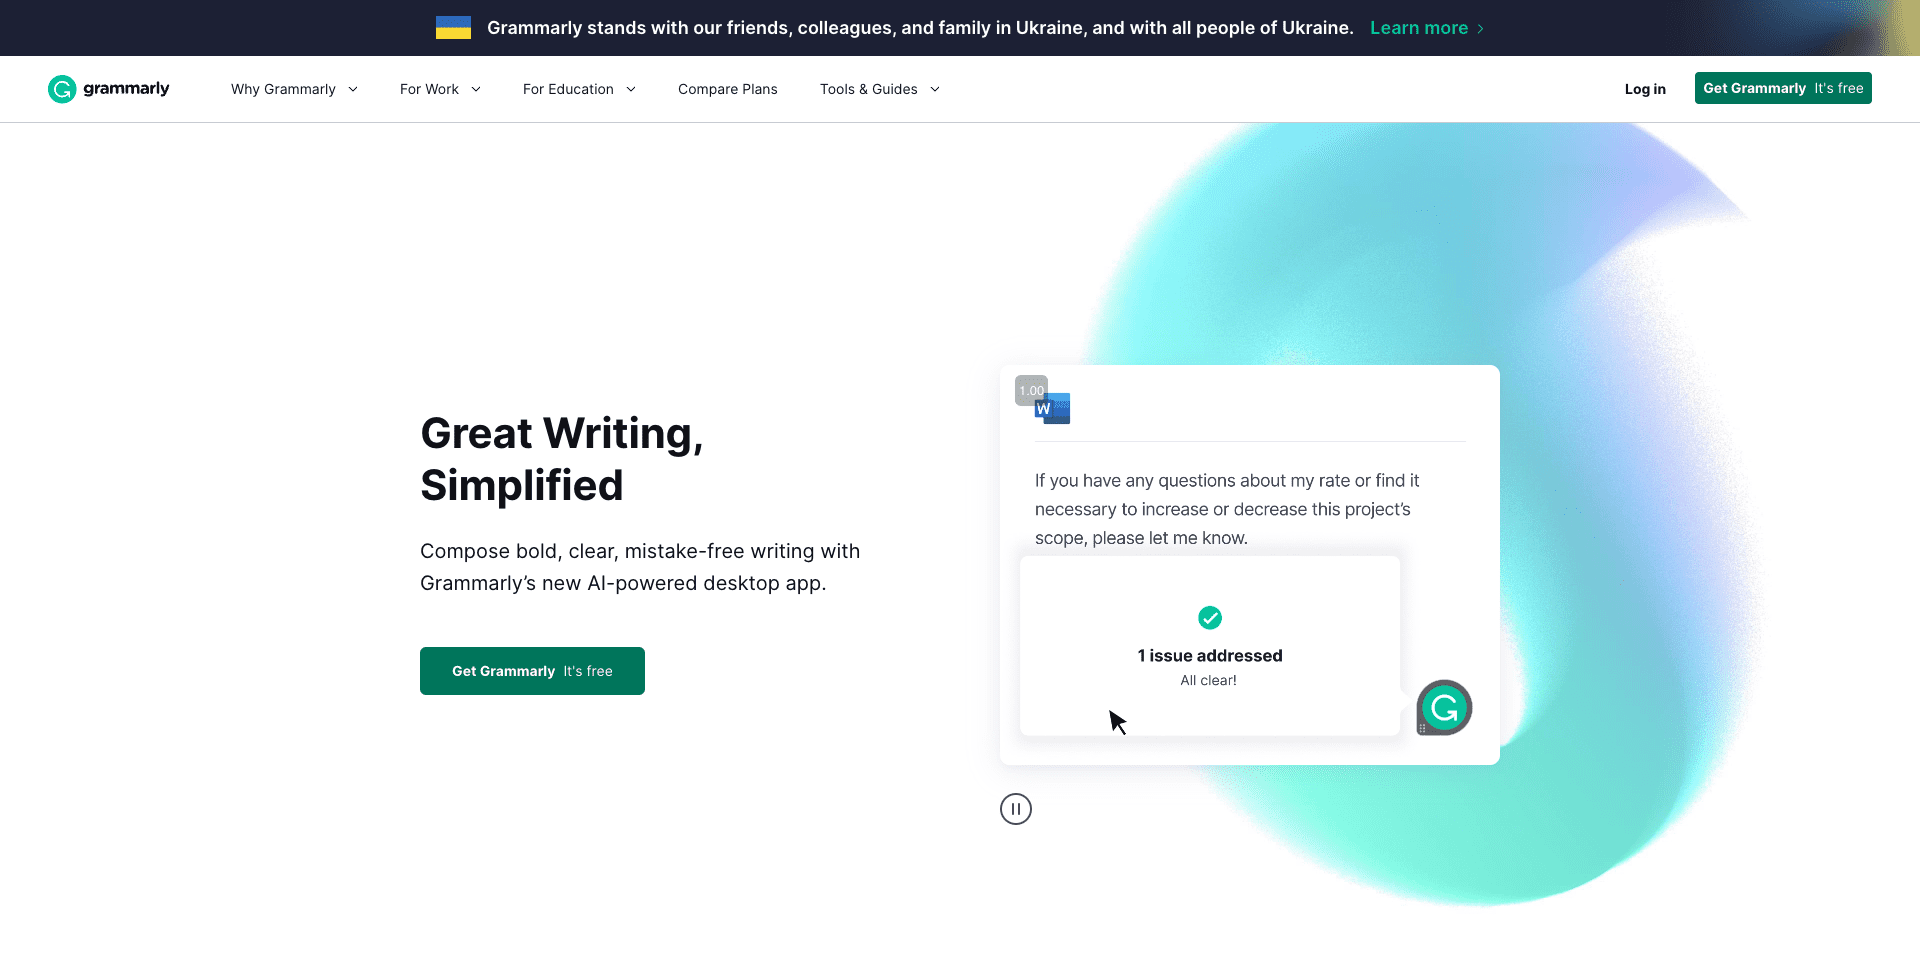 Screenshot of the Grammarly home page